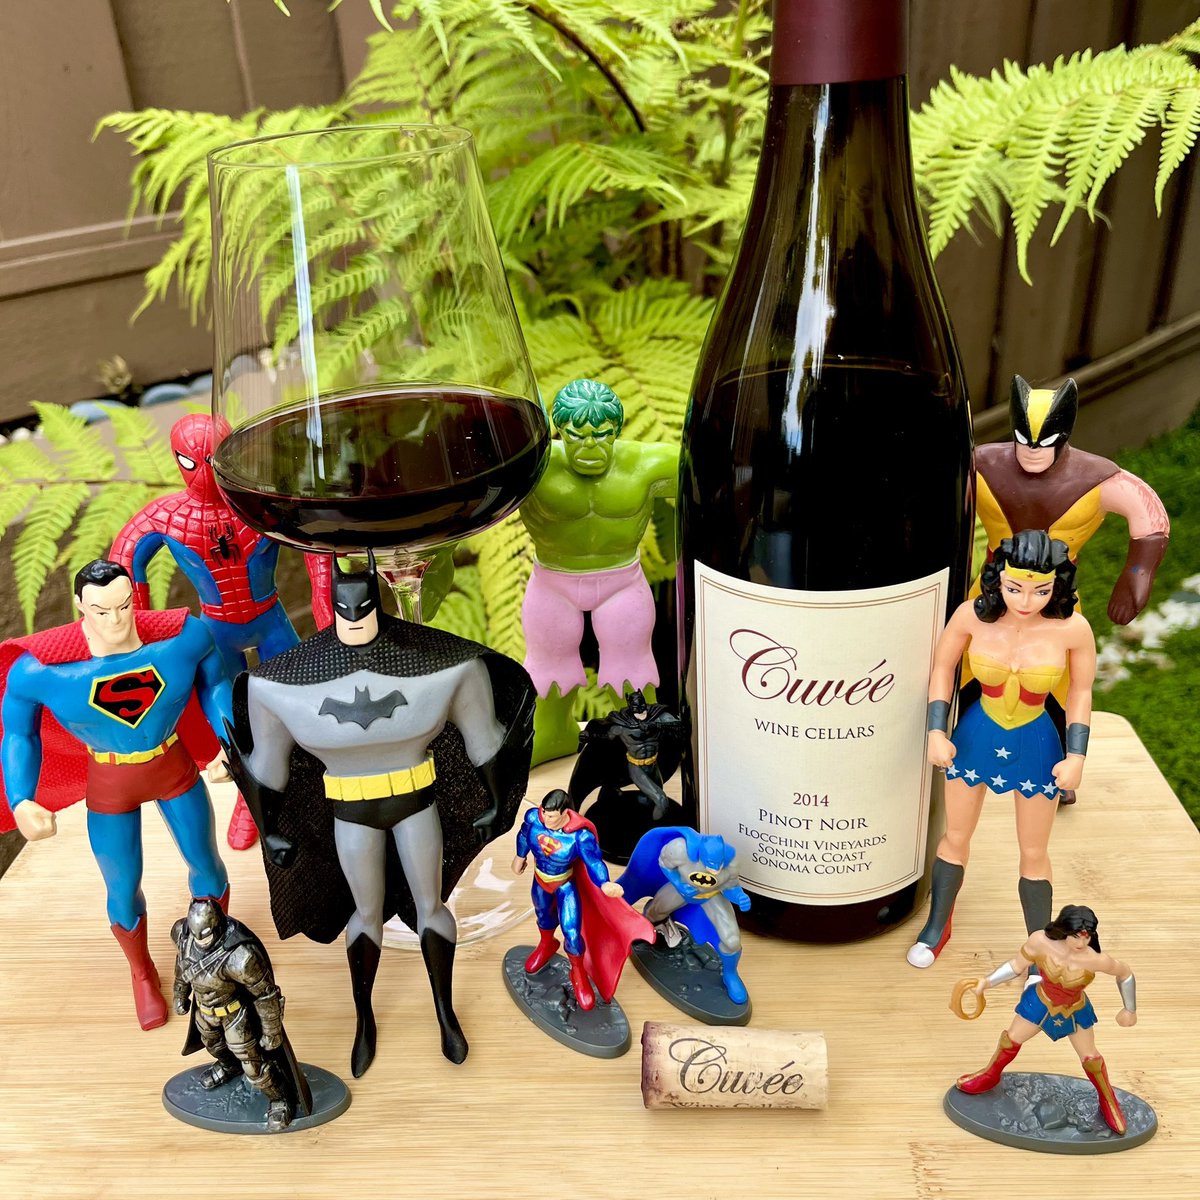 On #SuperheroDay, the gangs all here with a Cuvée Wine cellars pinot noir from @PetalumaGap. This one is still drinking well with a nose of black cherry, fresh cut roses and orange peel with flavors of ripe strawberry, mocha and cinnamon. Who is your favorite Superhero? @jflorez